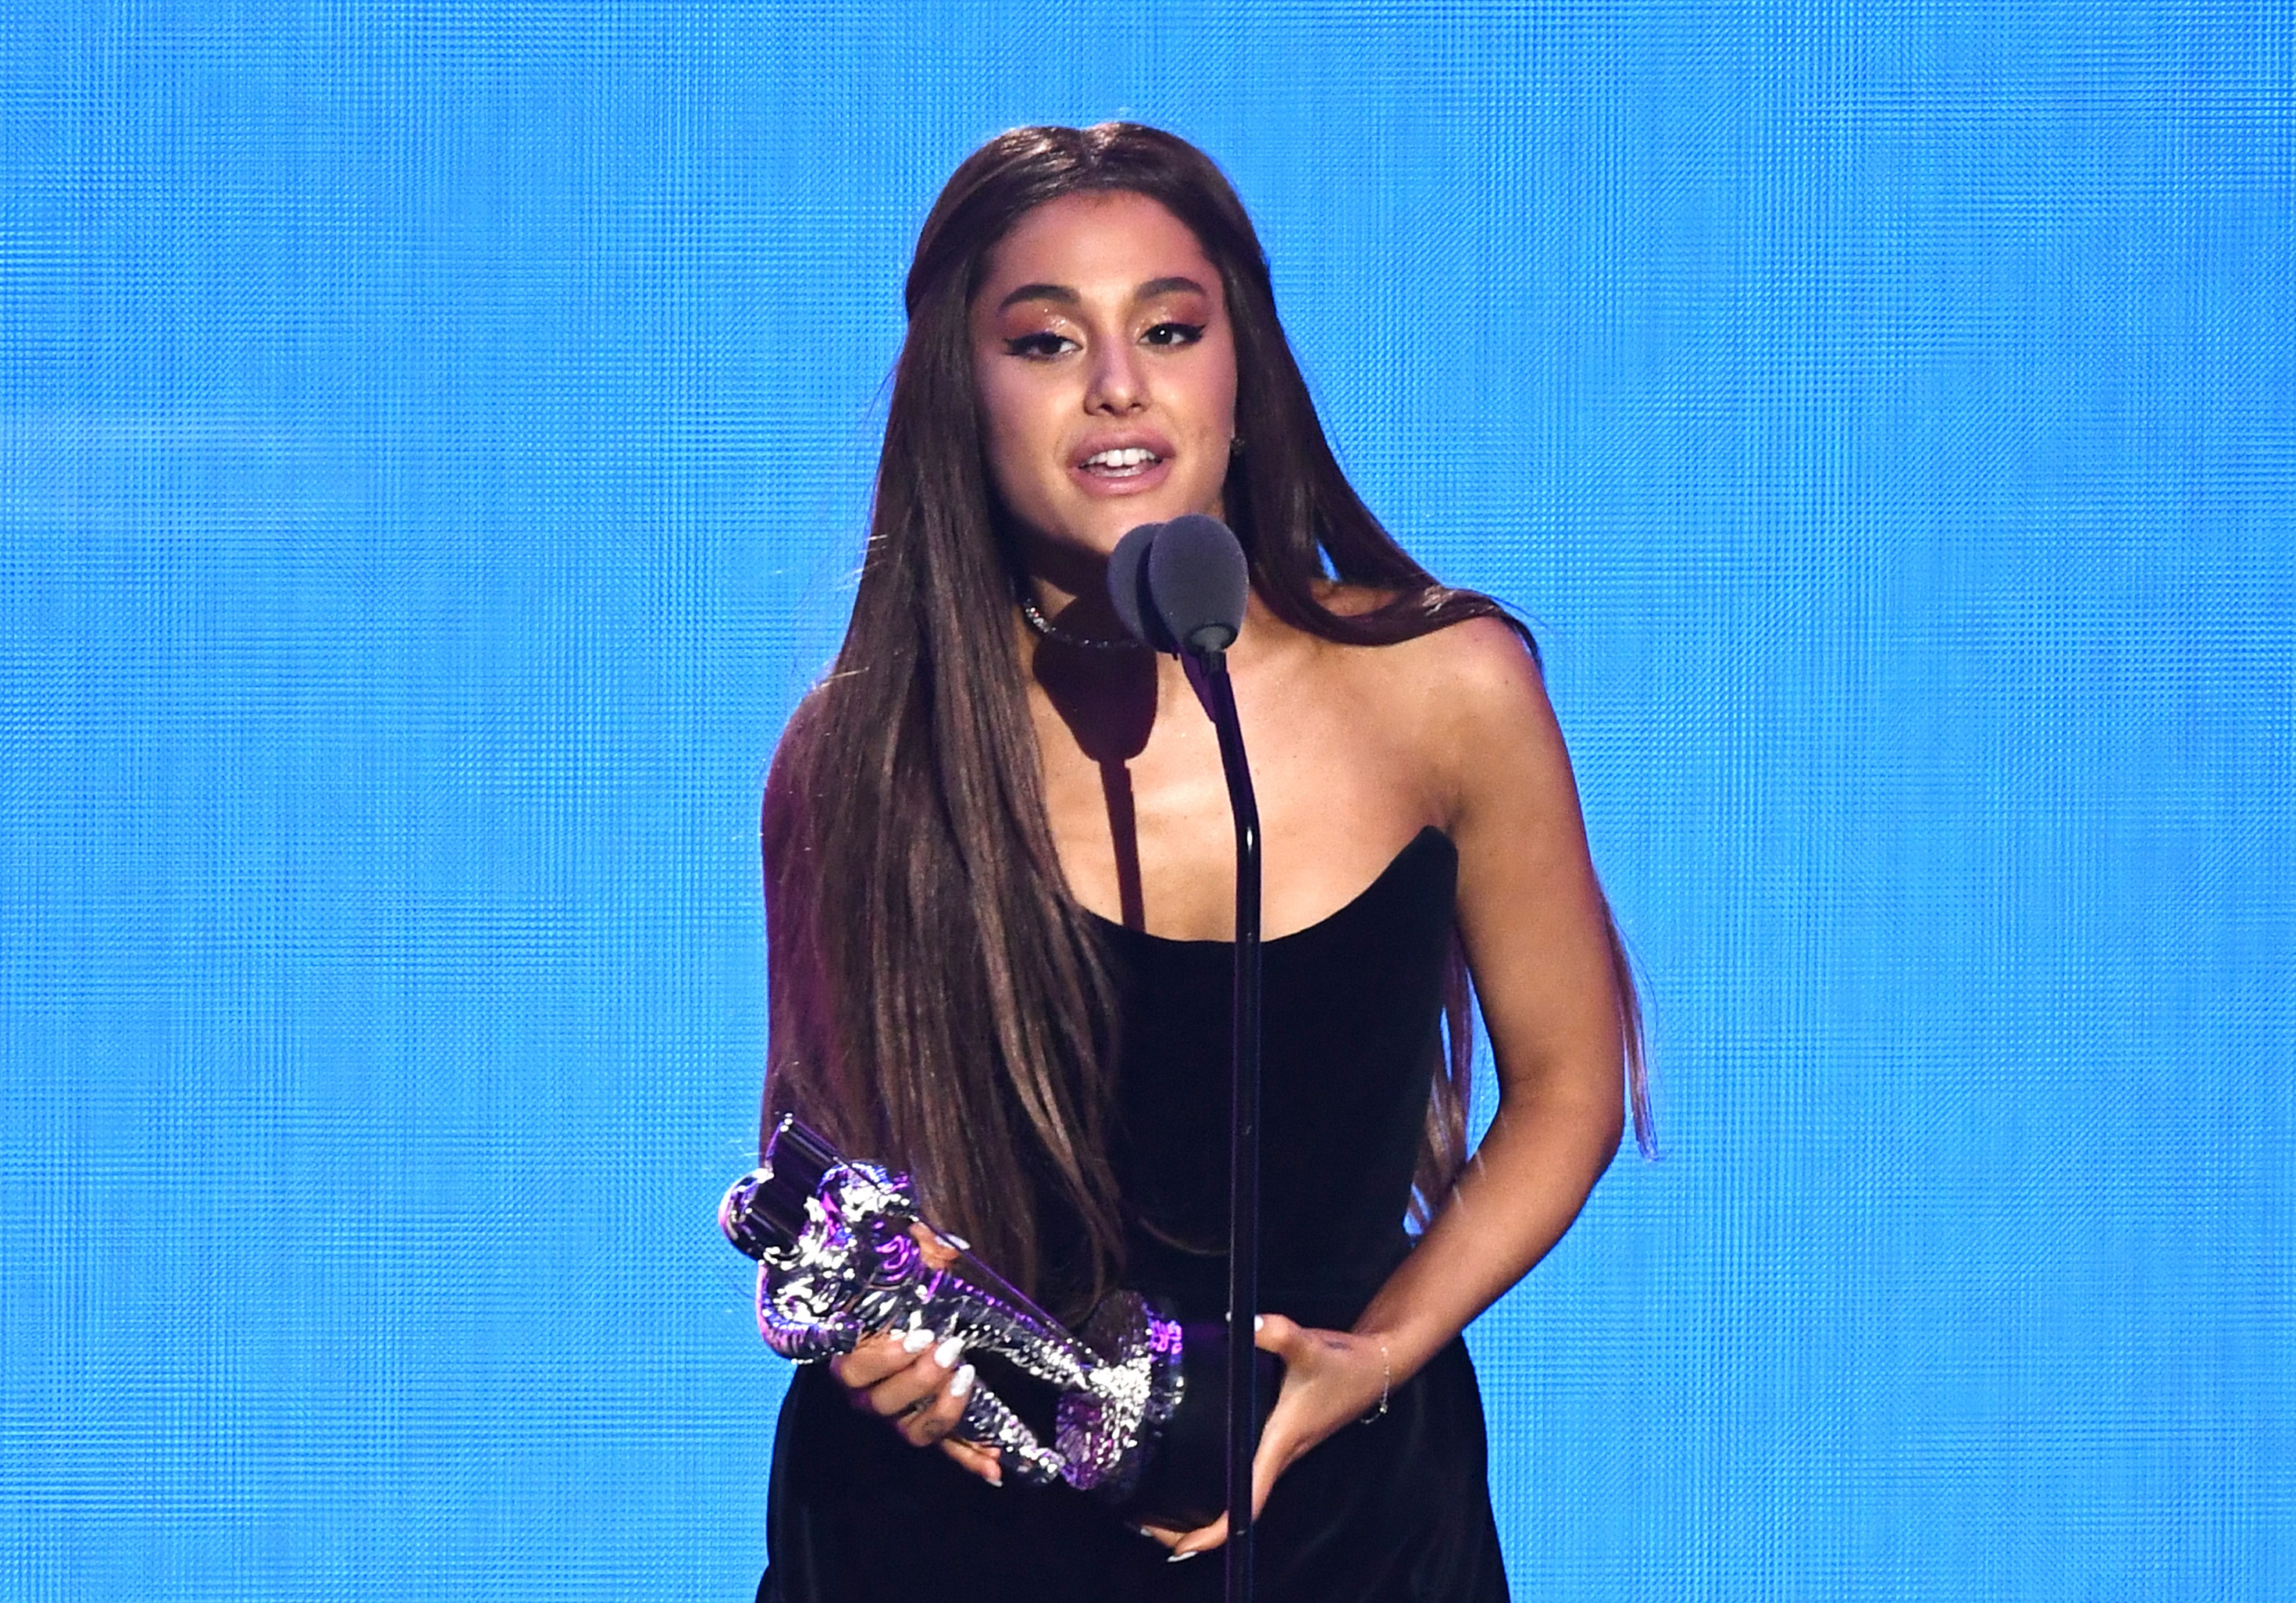 Ariana Grande Earned 9 MTV VMA Nominations in 2020, But She Can Only Win 8 Awards